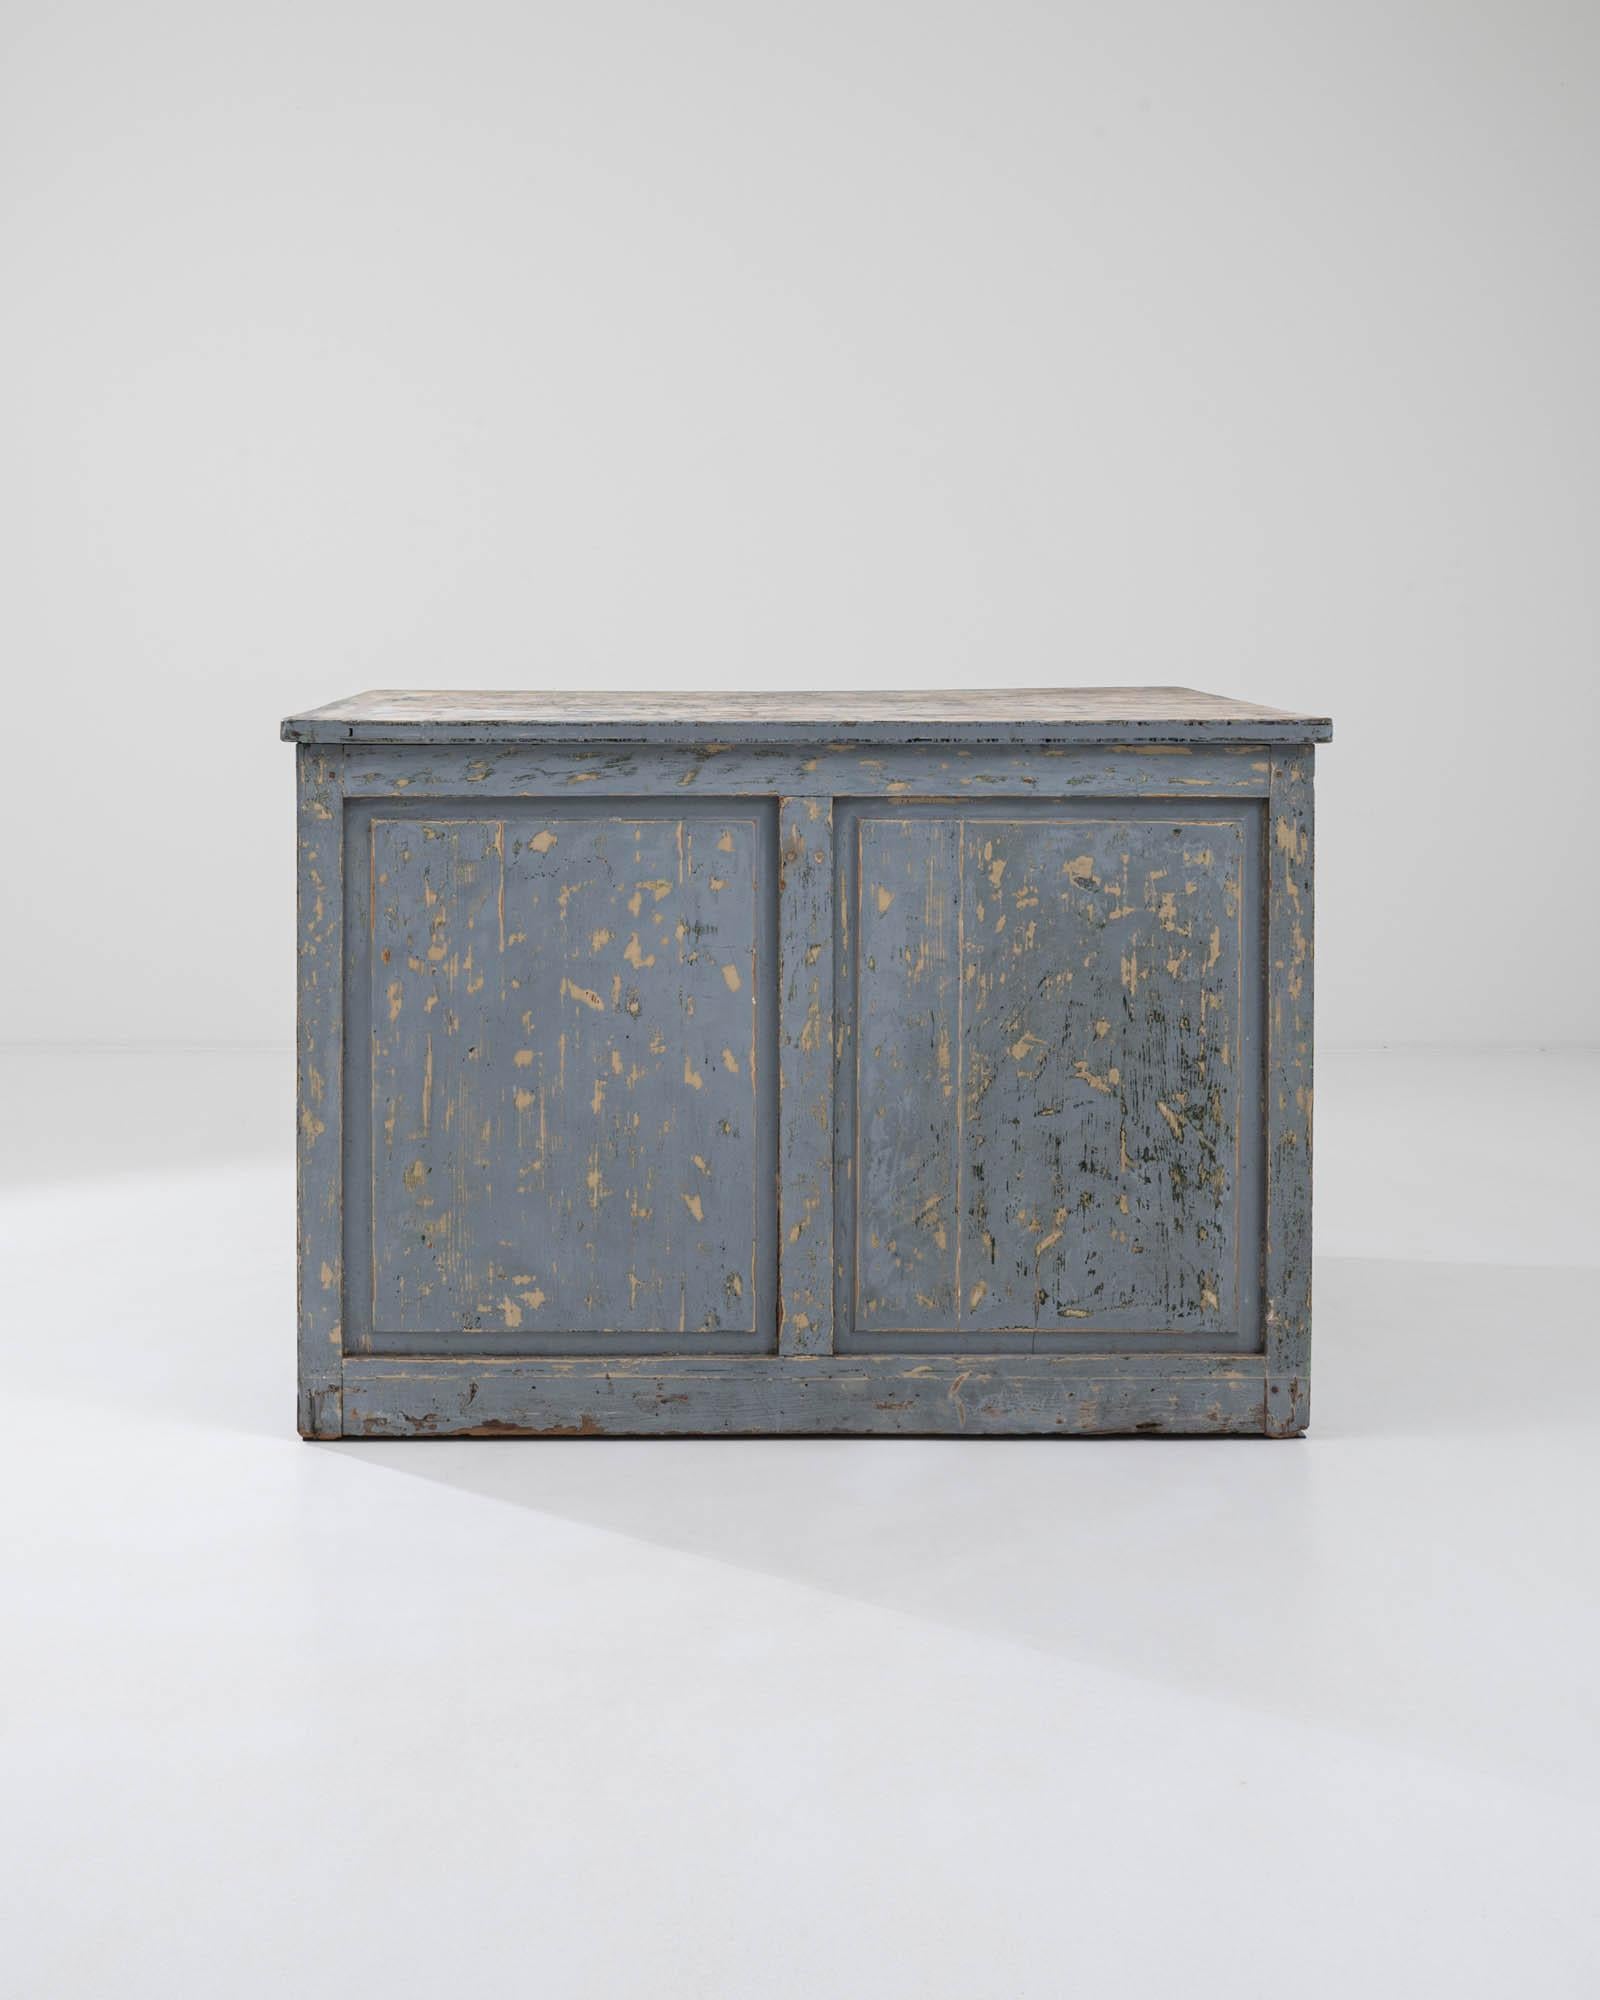 A nostalgic patina gives this Industrial flat file cabinet a one-of-a-kind personality. Built in France at the turn of the century, the spacious cabinet houses an array of long, slender drawers — a shape which indicates that this piece was likely